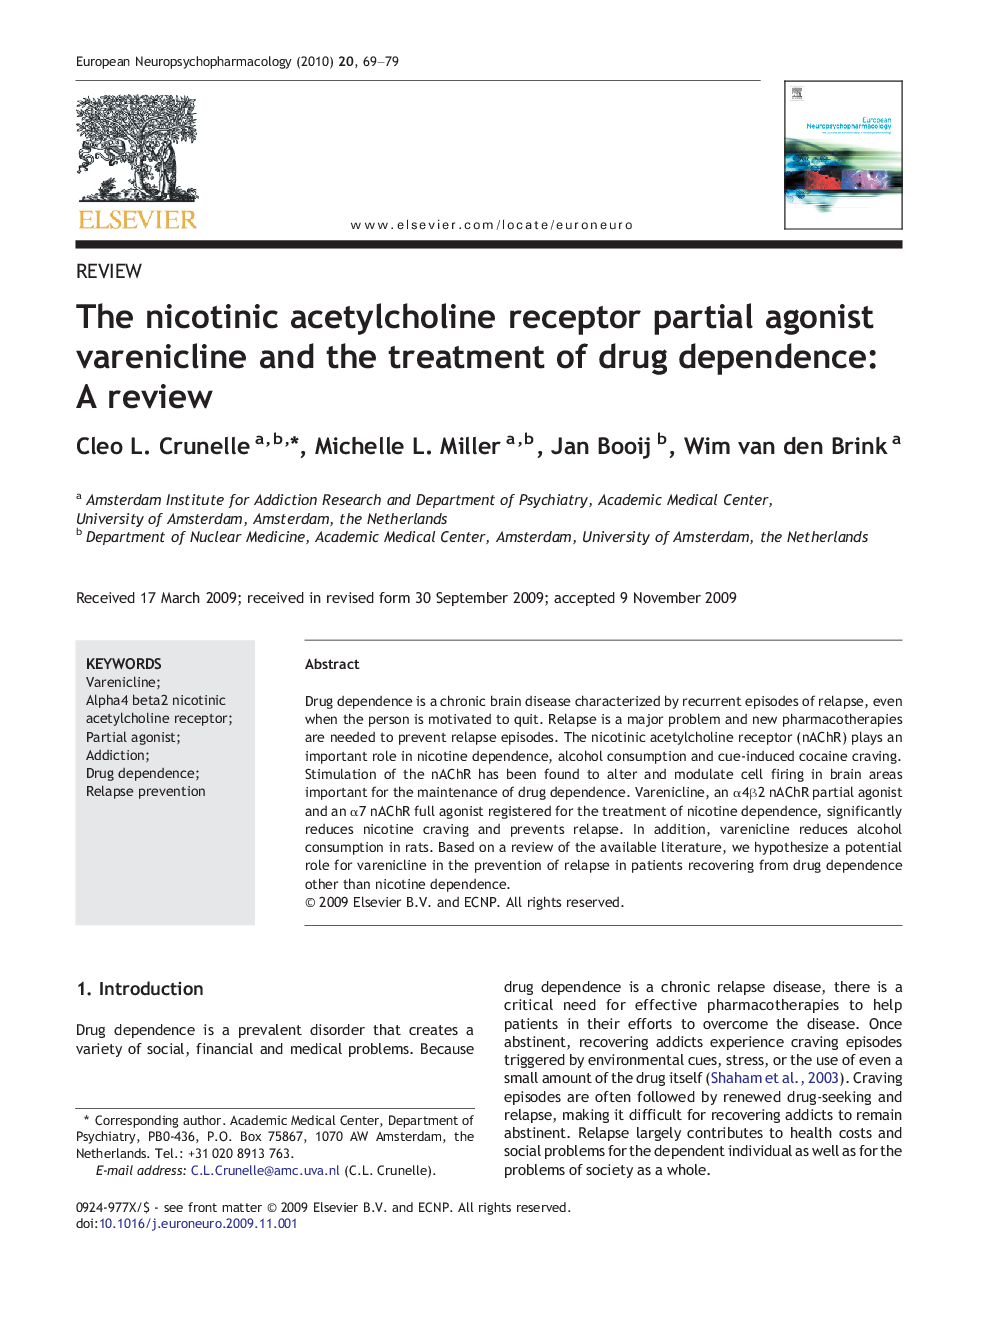 The nicotinic acetylcholine receptor partial agonist varenicline and the treatment of drug dependence: A review